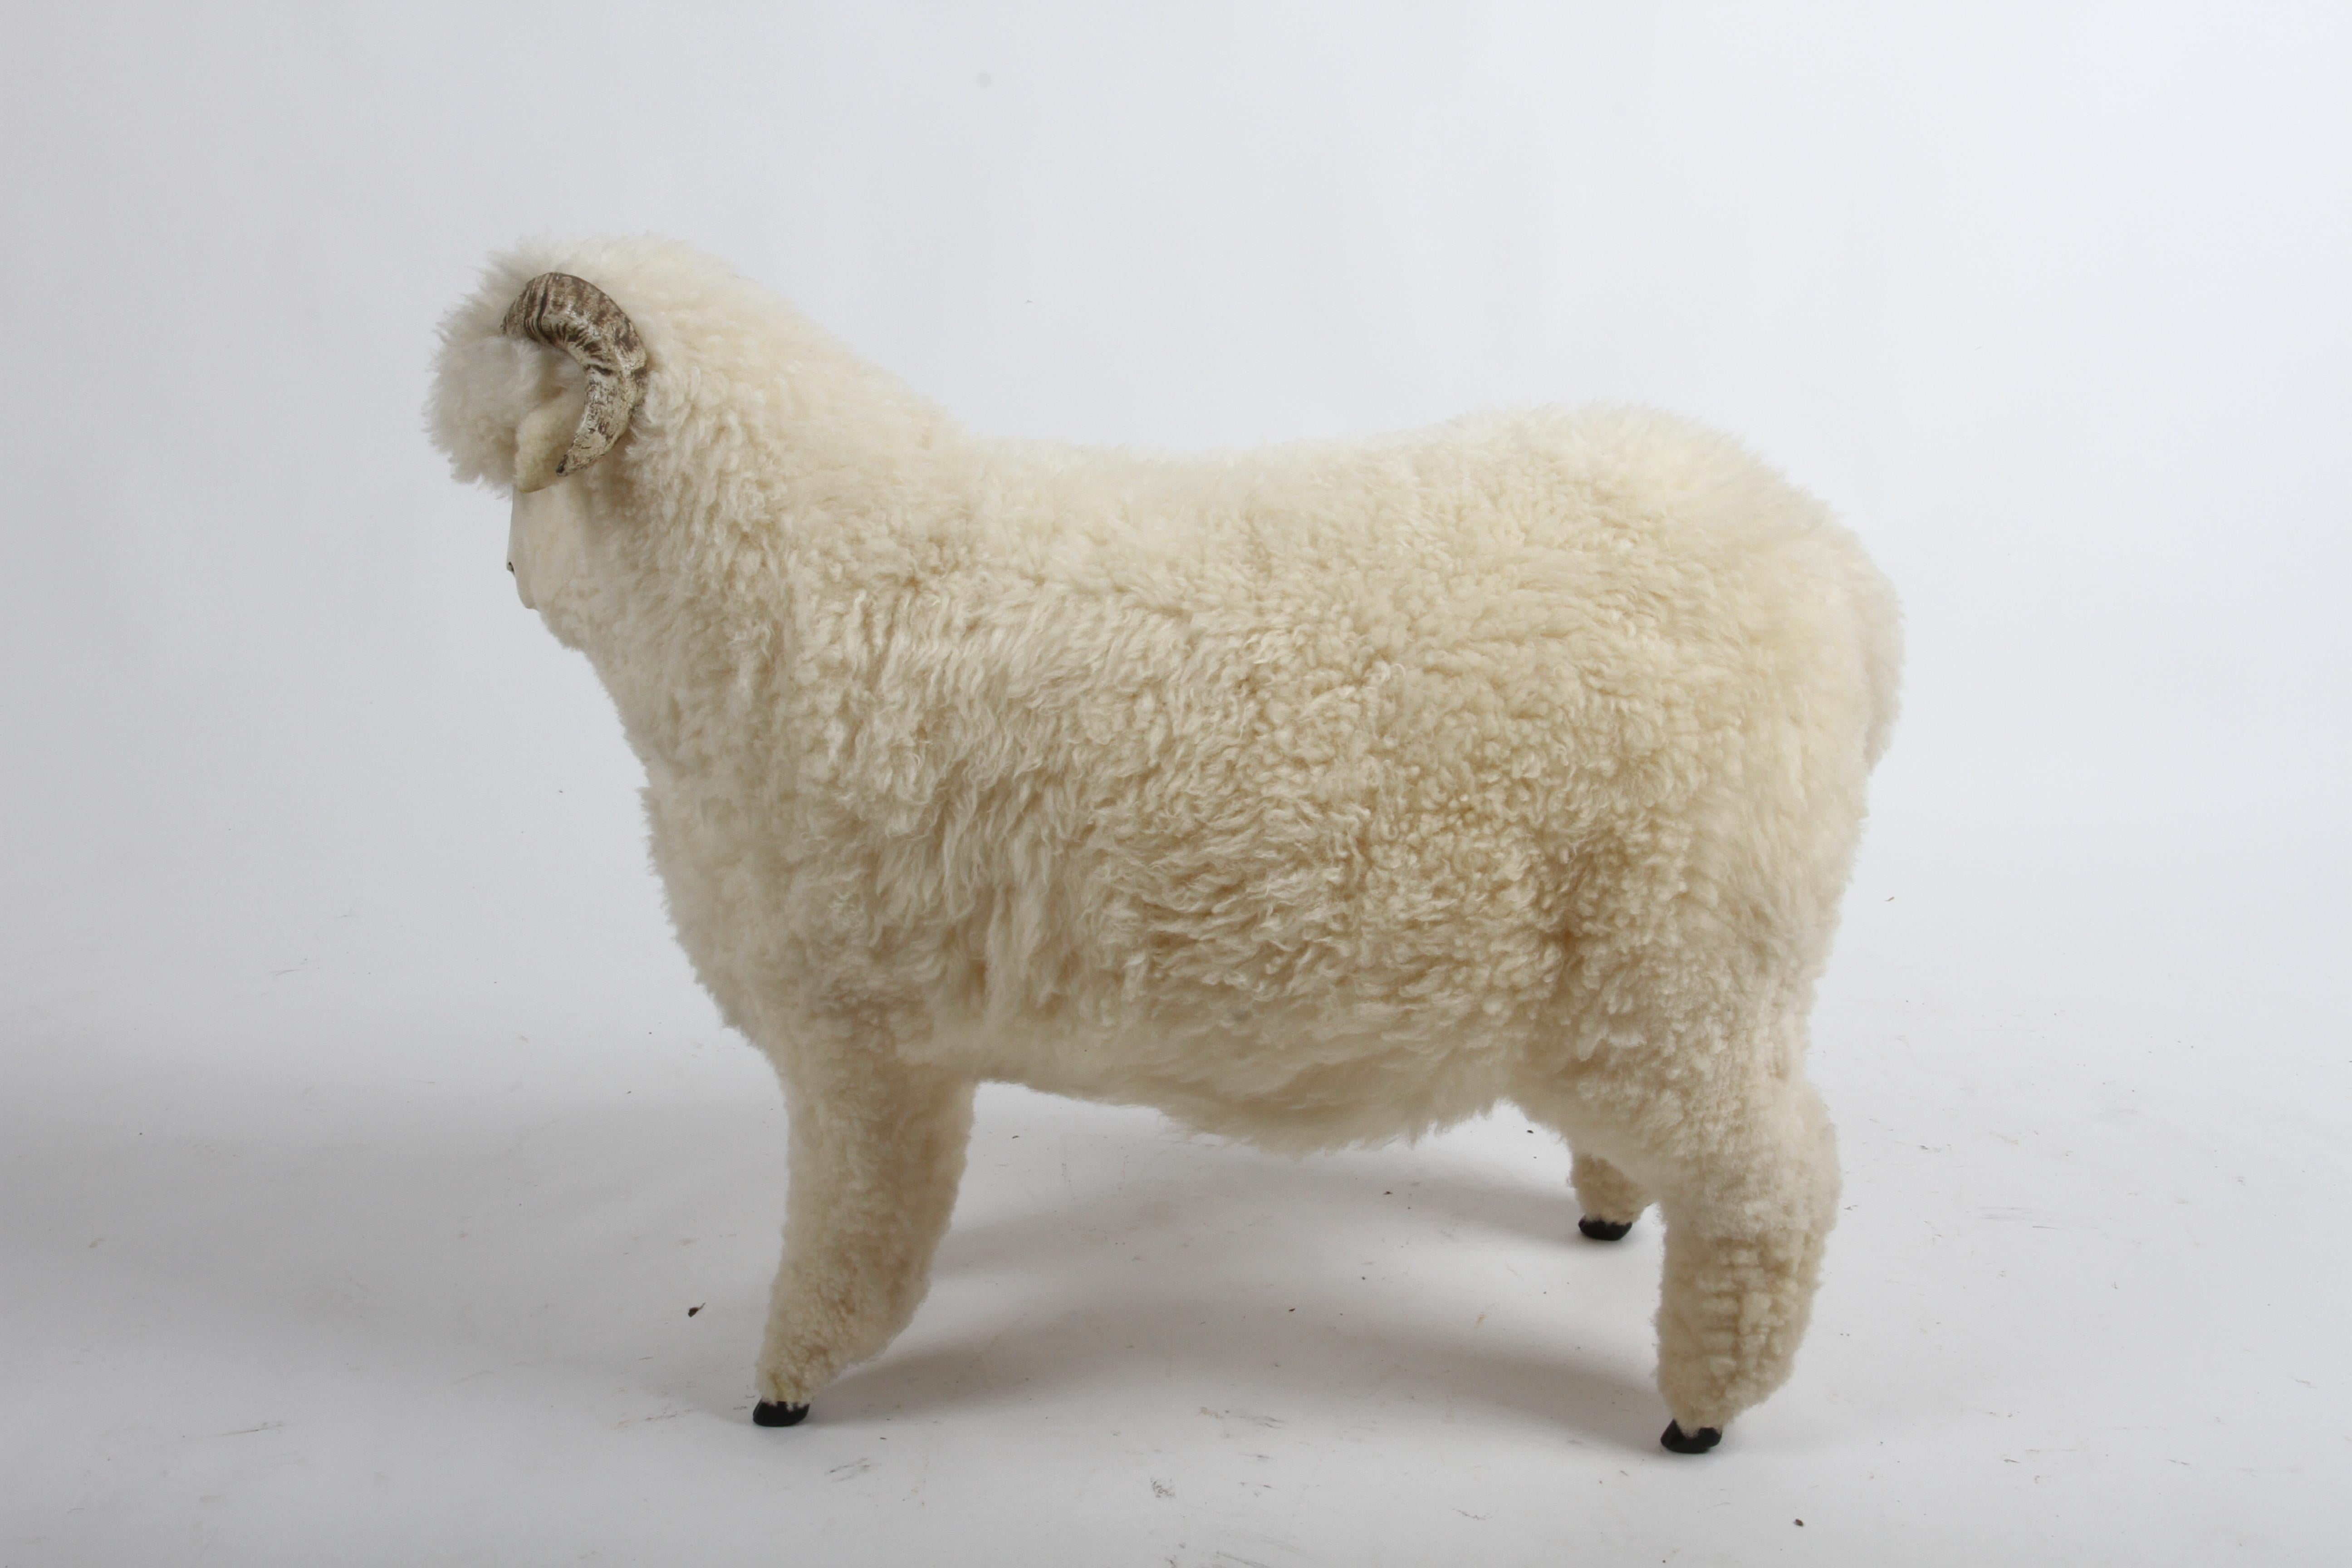 Vintage 1980s Life-Size Sheep Sculpture Ottoman or Footstool by Joel Donahoe For Sale 8